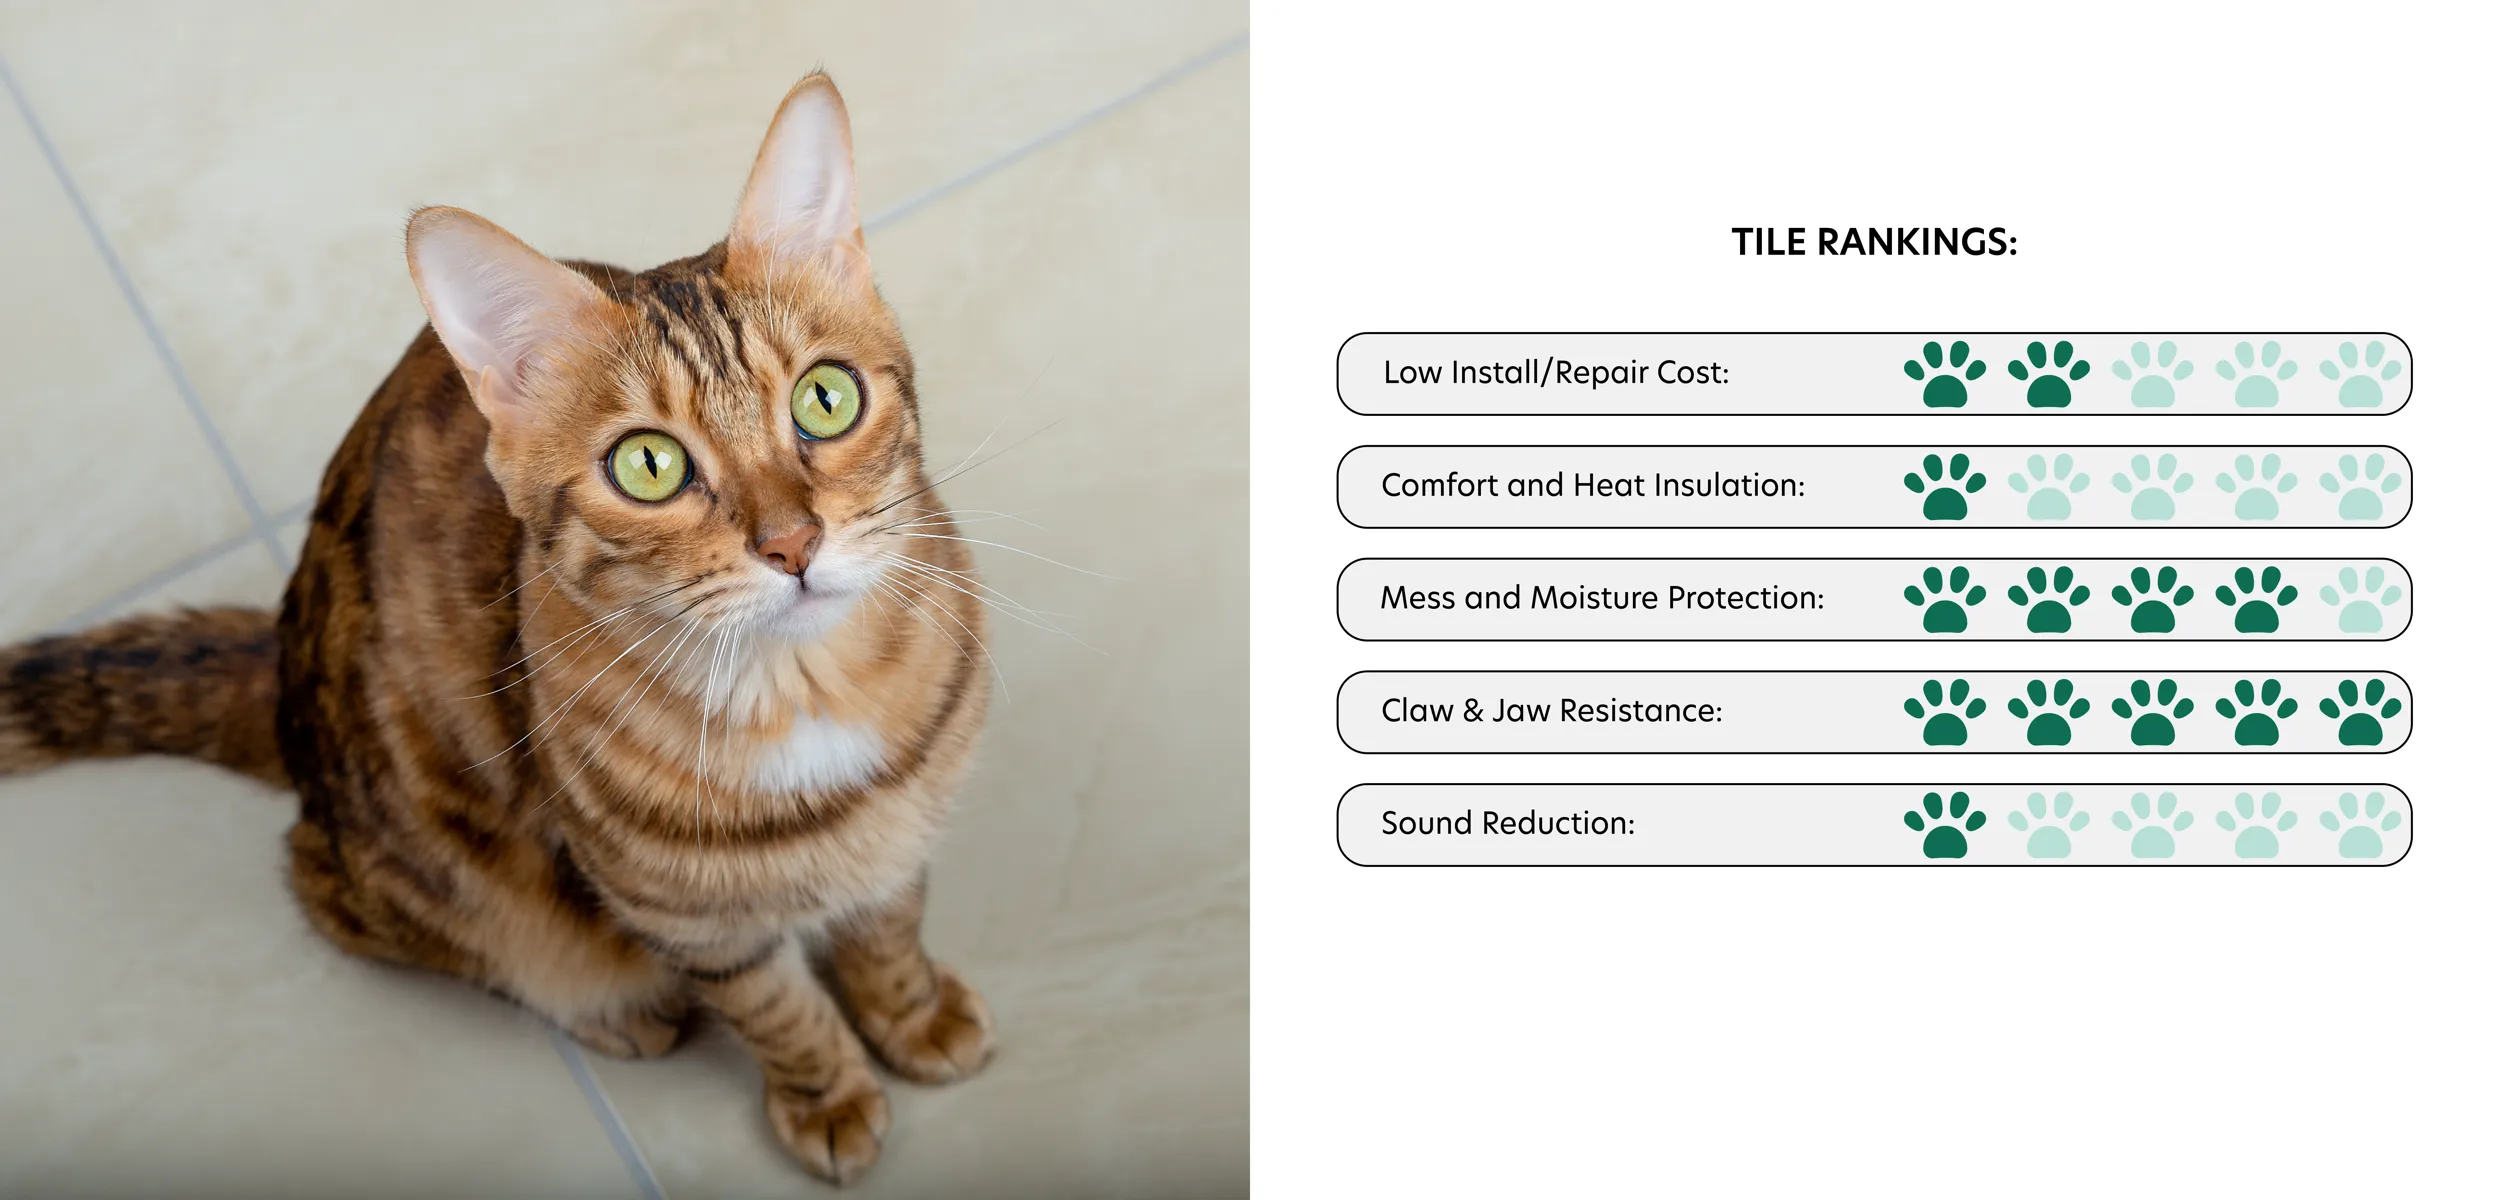 Orange cat with green eyes sitting on tile and looking up. Tile rankings in best flooring for pets. Low Install/Repair Cost: 2 Paws. Comfort and Heat Insulation: 1 Paw. Mess and Moisture Protection: 4 Paws. Claw & Jaw Resistance: 5 Paws. Sound Reduction: 1 Paw.